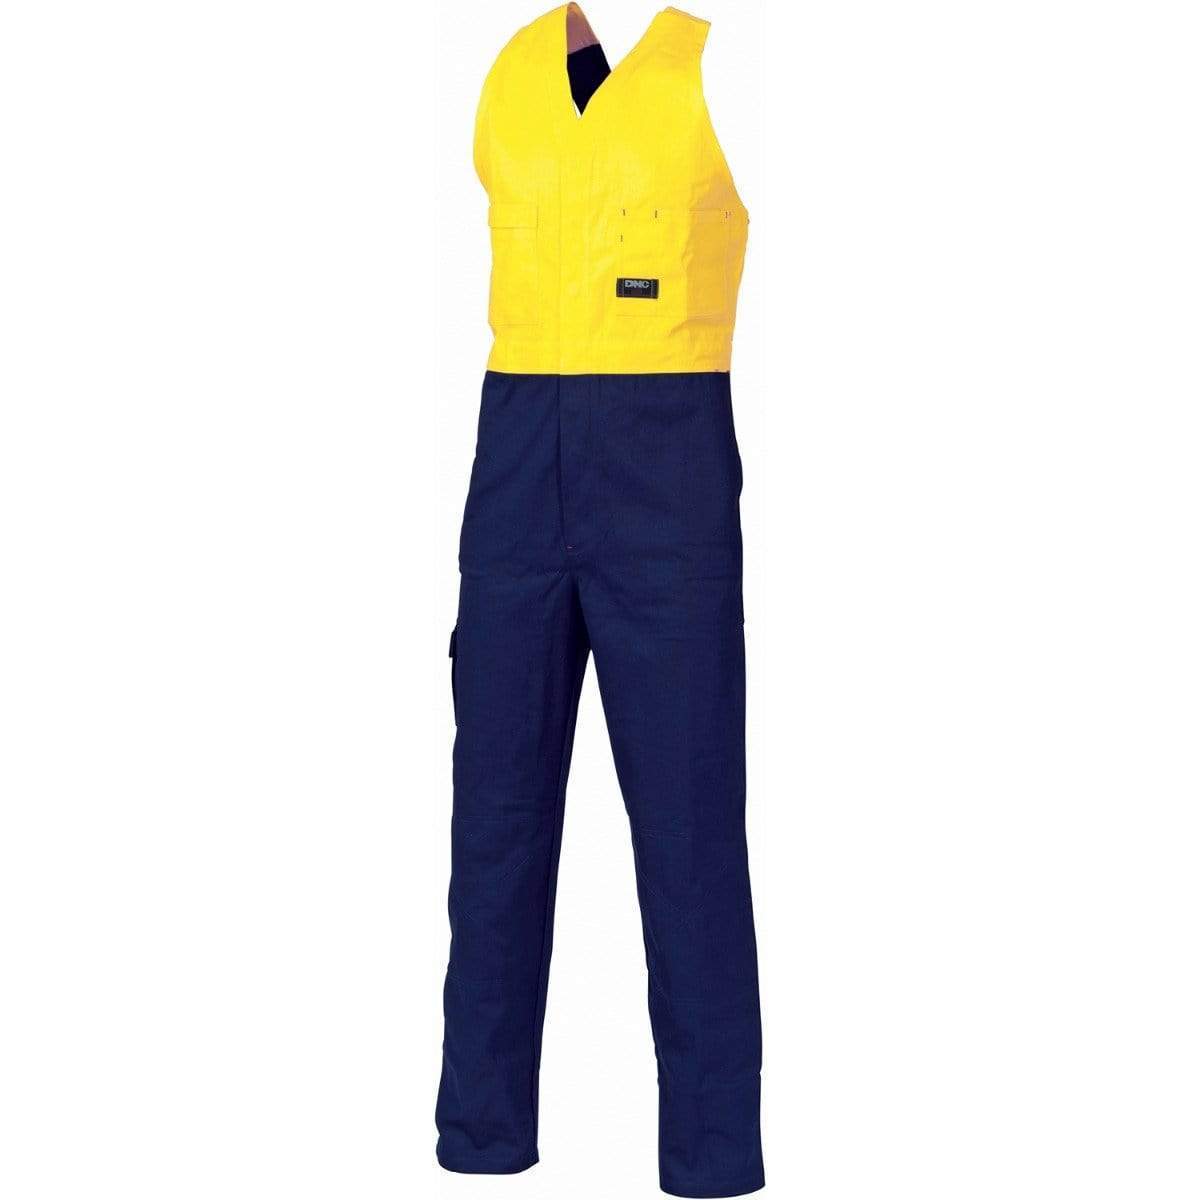 Dnc Workwear Hi-vis Two-tone Cotton Action Back Overall - 3853 Work Wear DNC Workwear Yellow/Navy 77R 